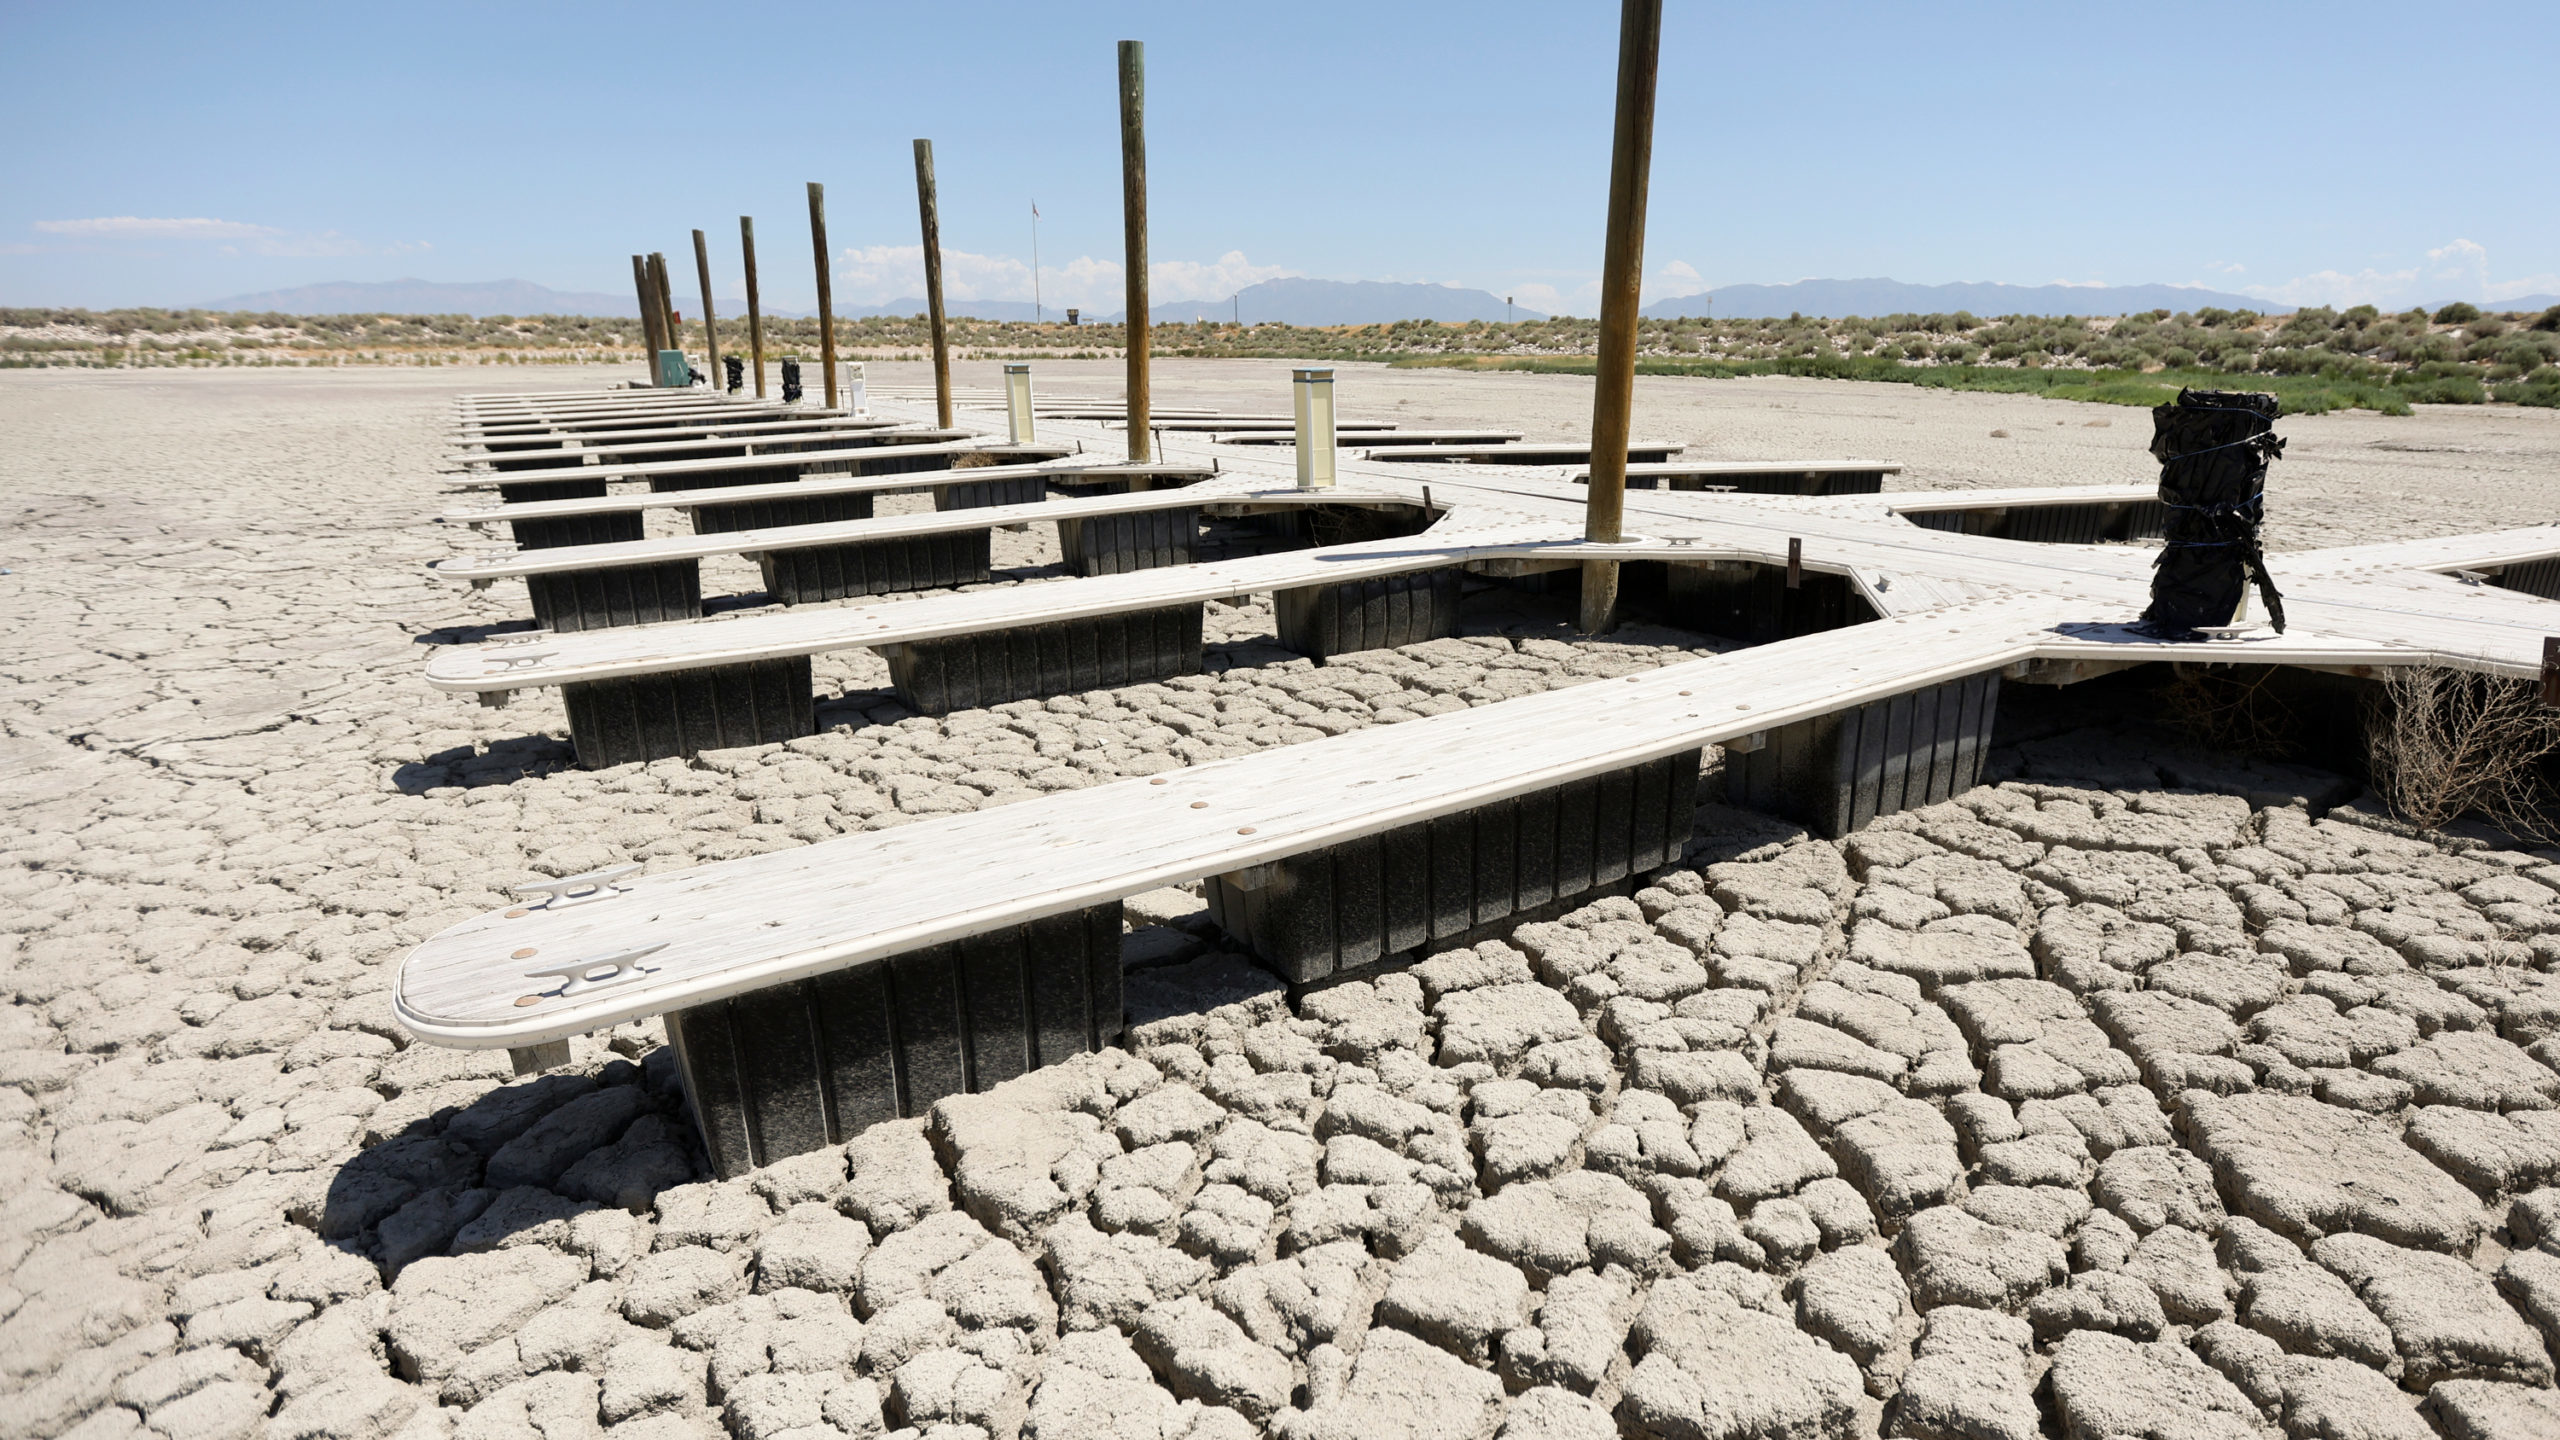 A dried marina pictured, most recent utah drought update isn't looking great...